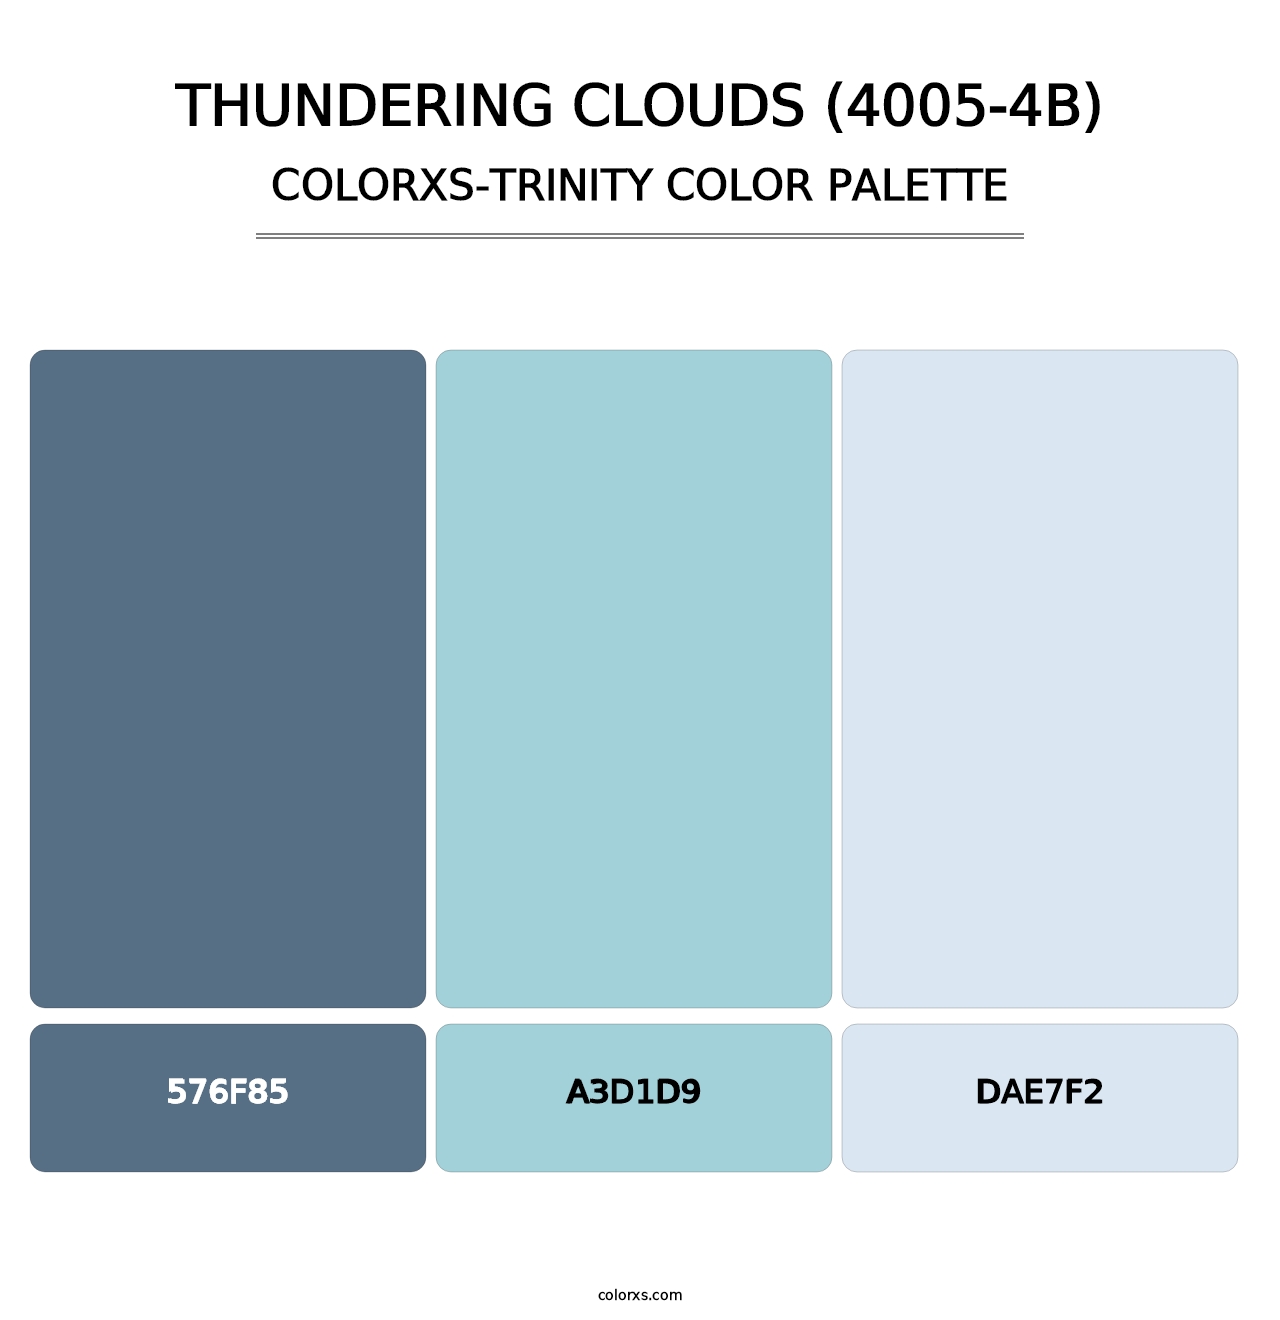 Thundering Clouds (4005-4B) - Colorxs Trinity Palette